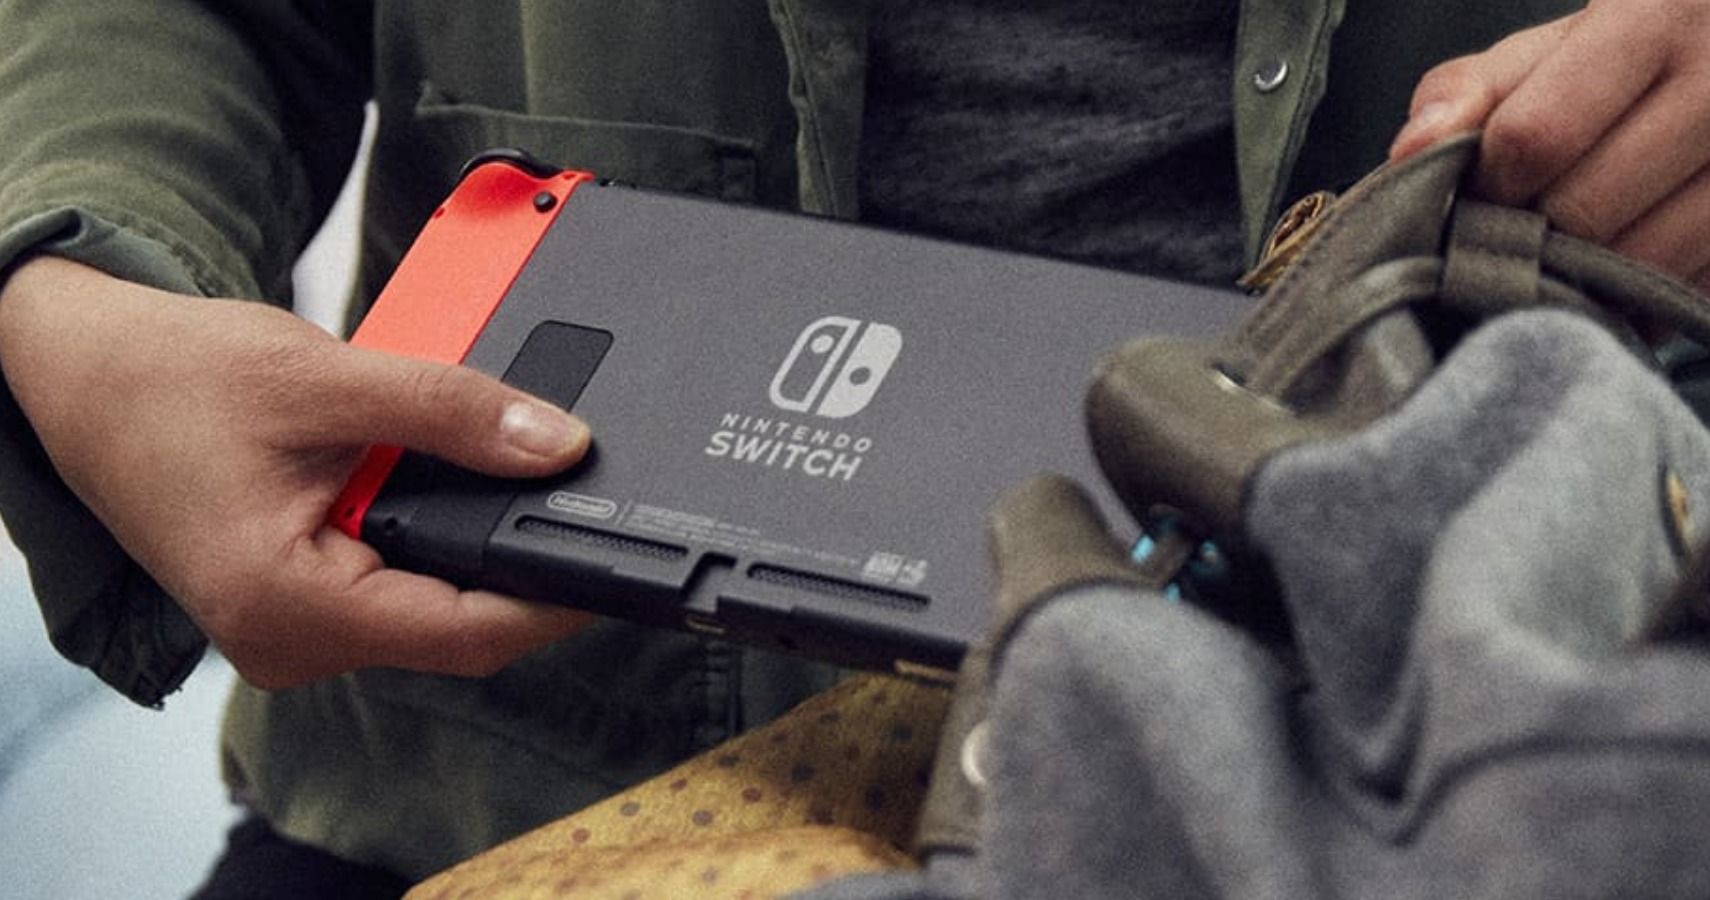 Nintendo Switch Cover